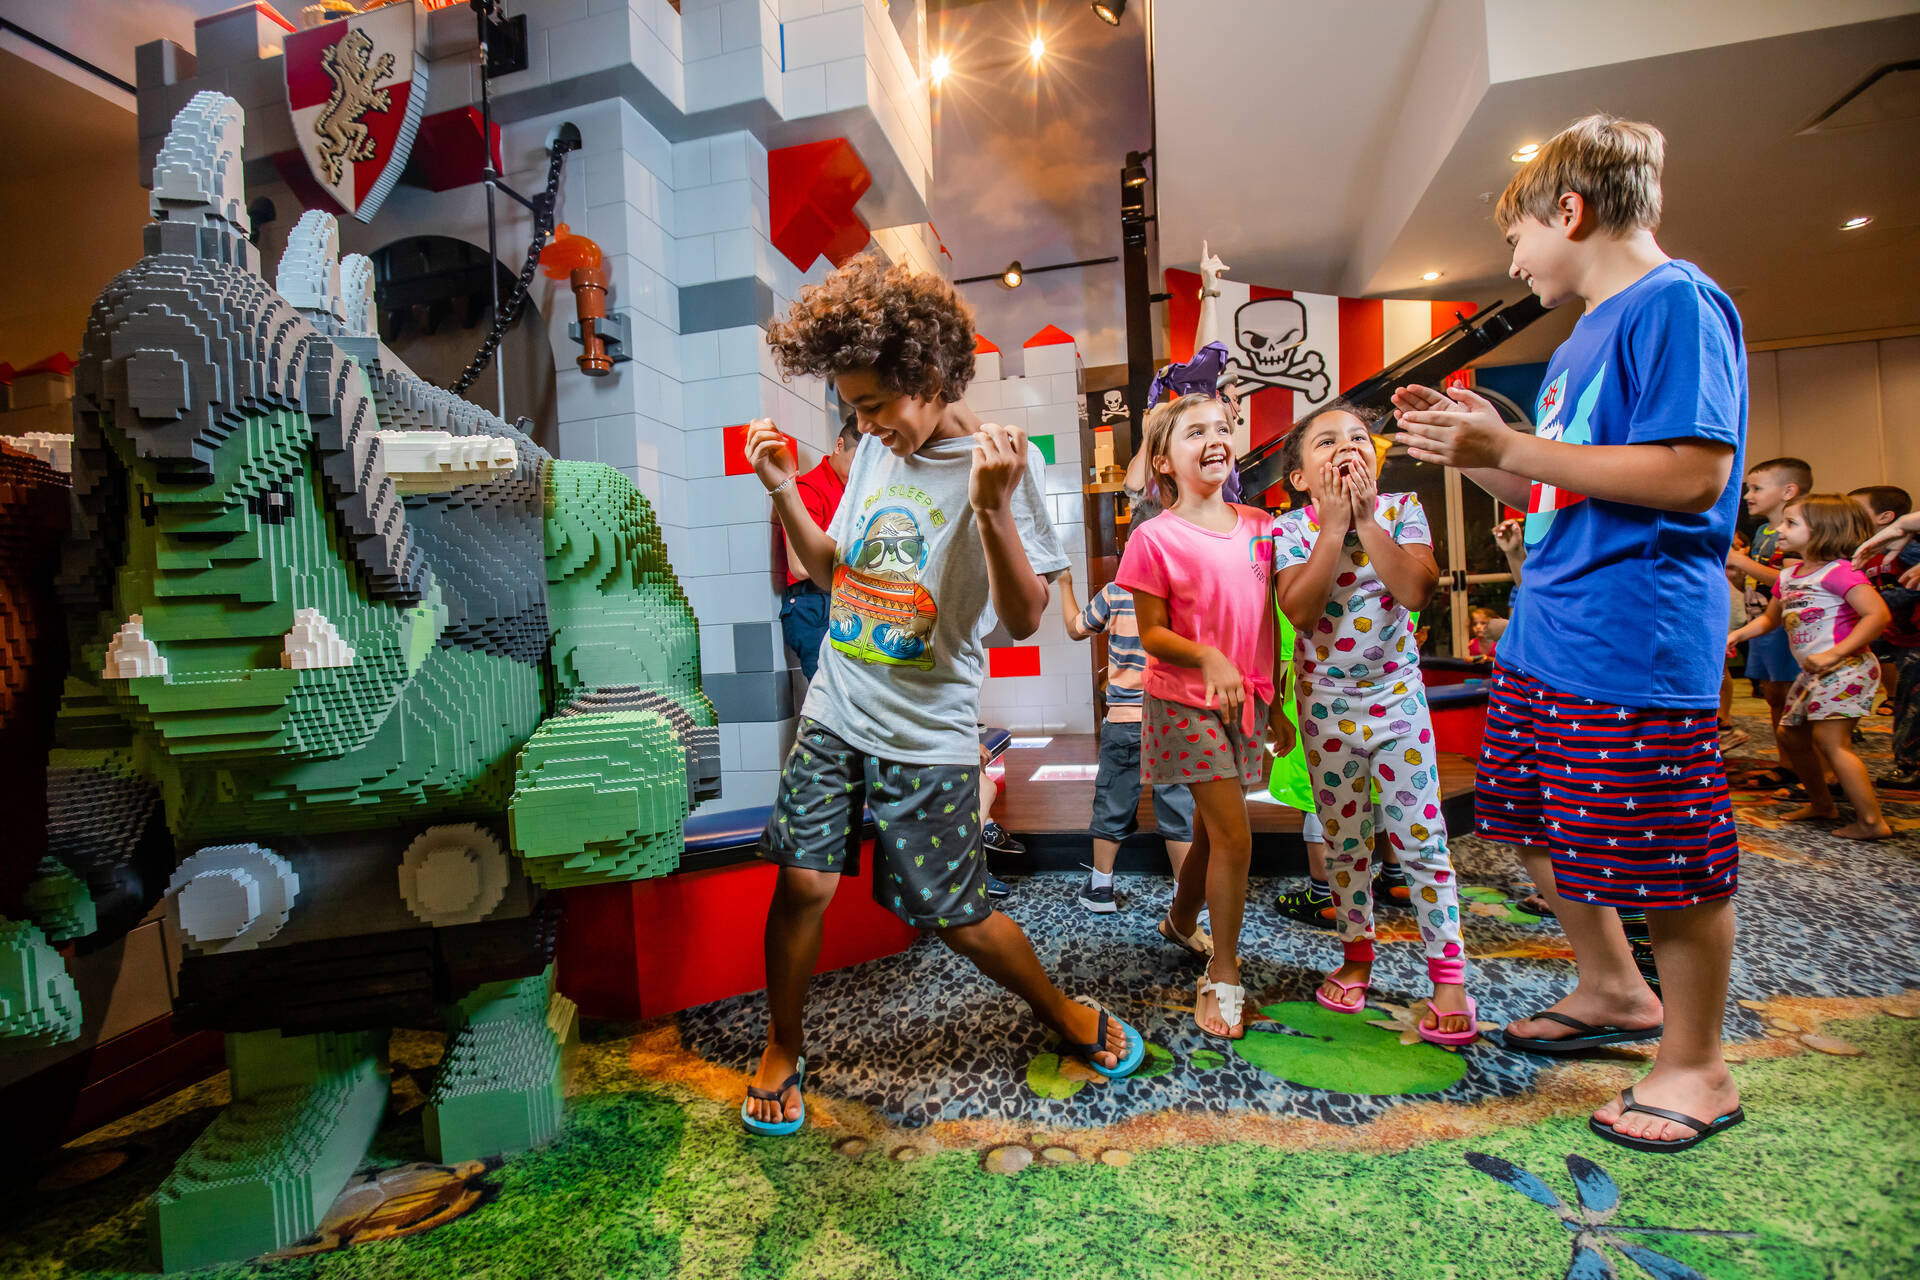 Kids join a dance party at the LEGOLAND Hotel